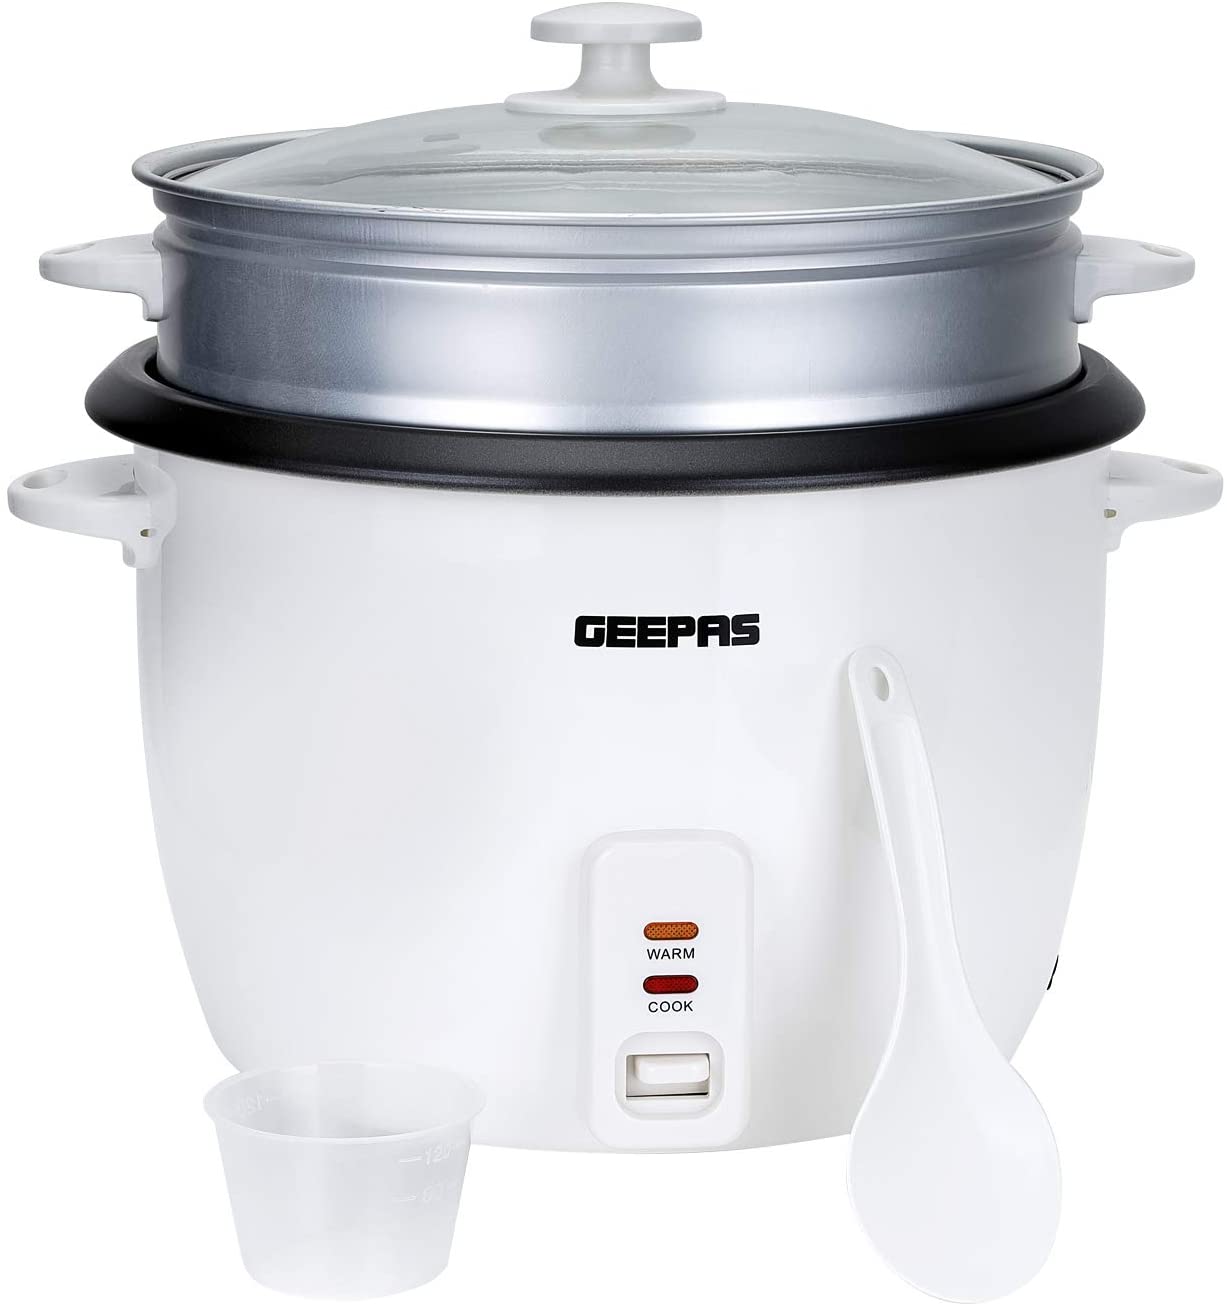 Geepas Automatic Rice Cooker 2.8L White